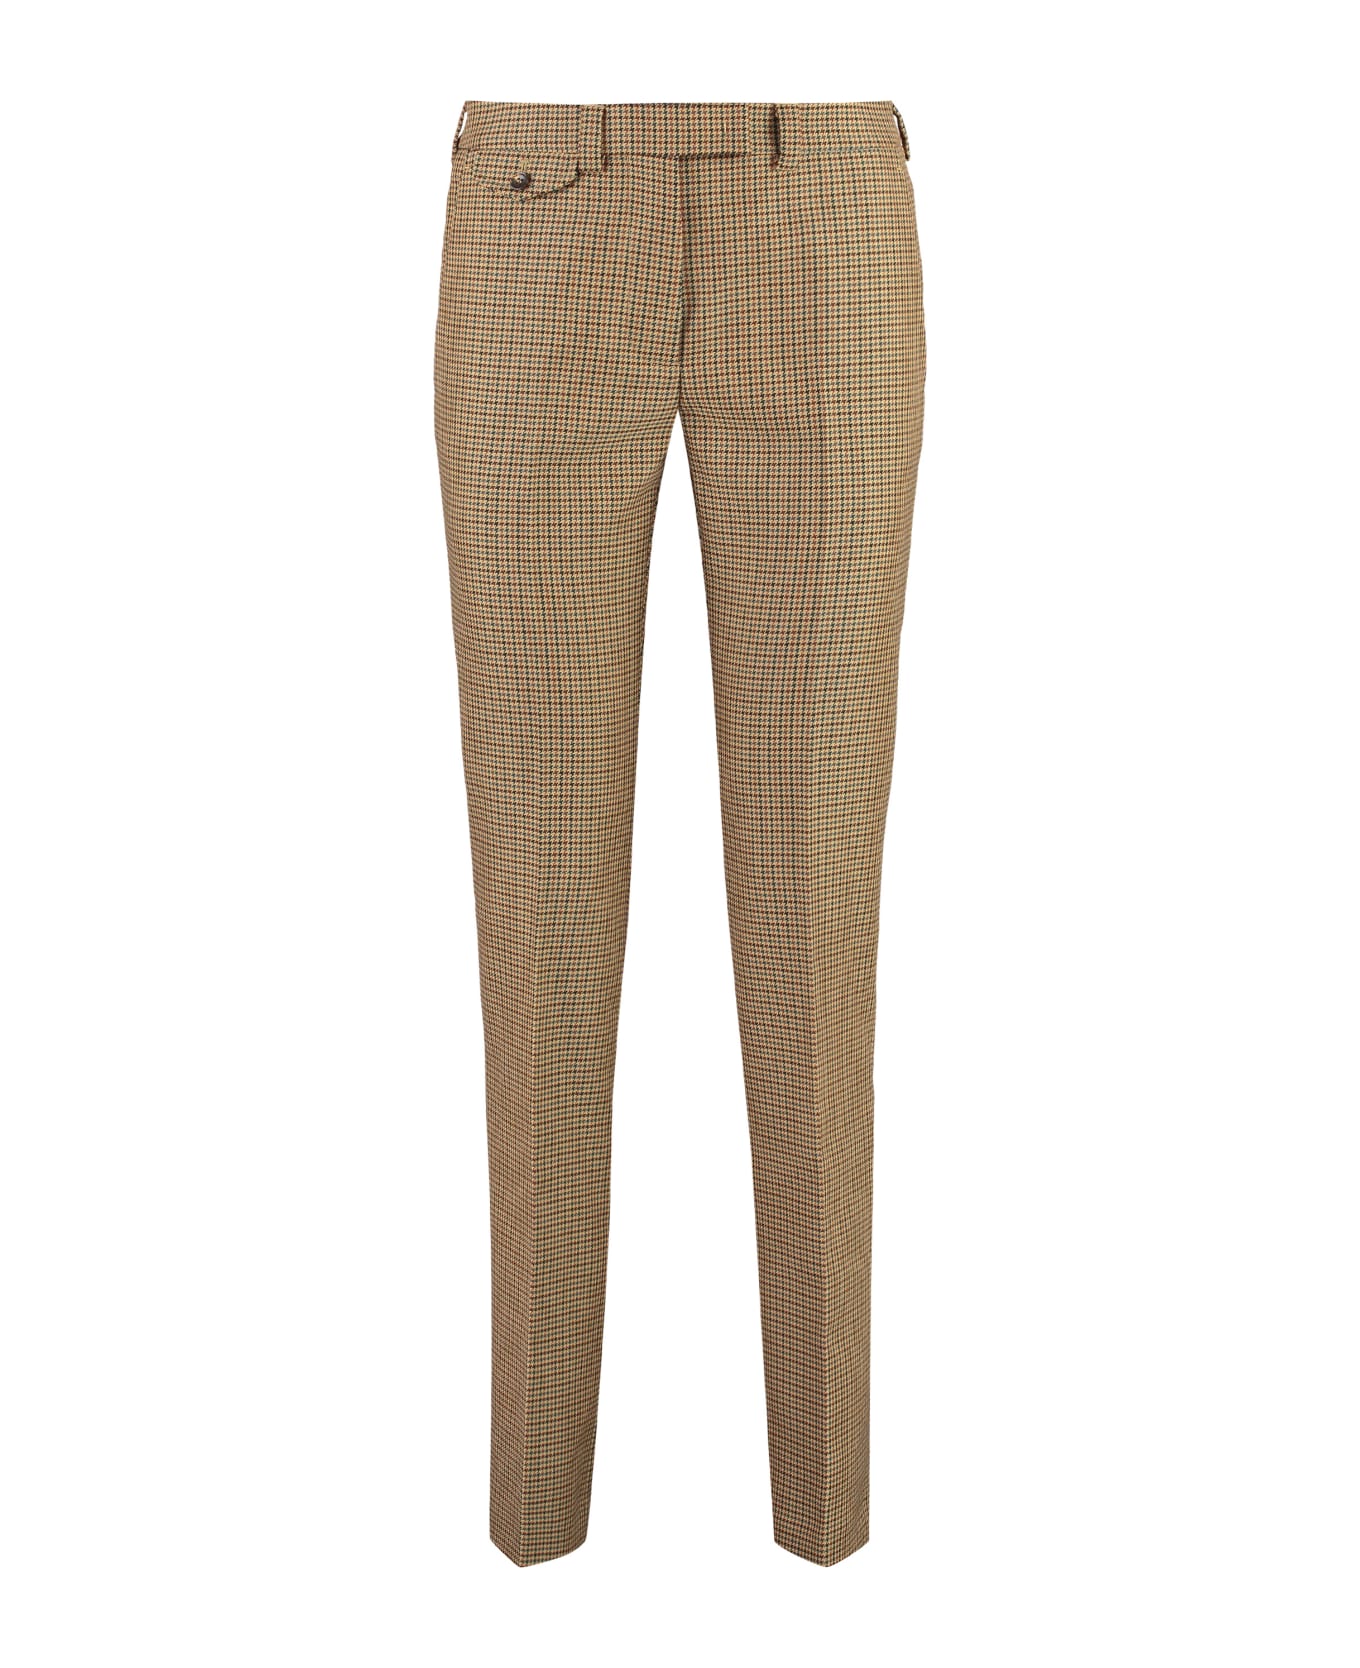 Bally Houndstooth Trousers - Camel